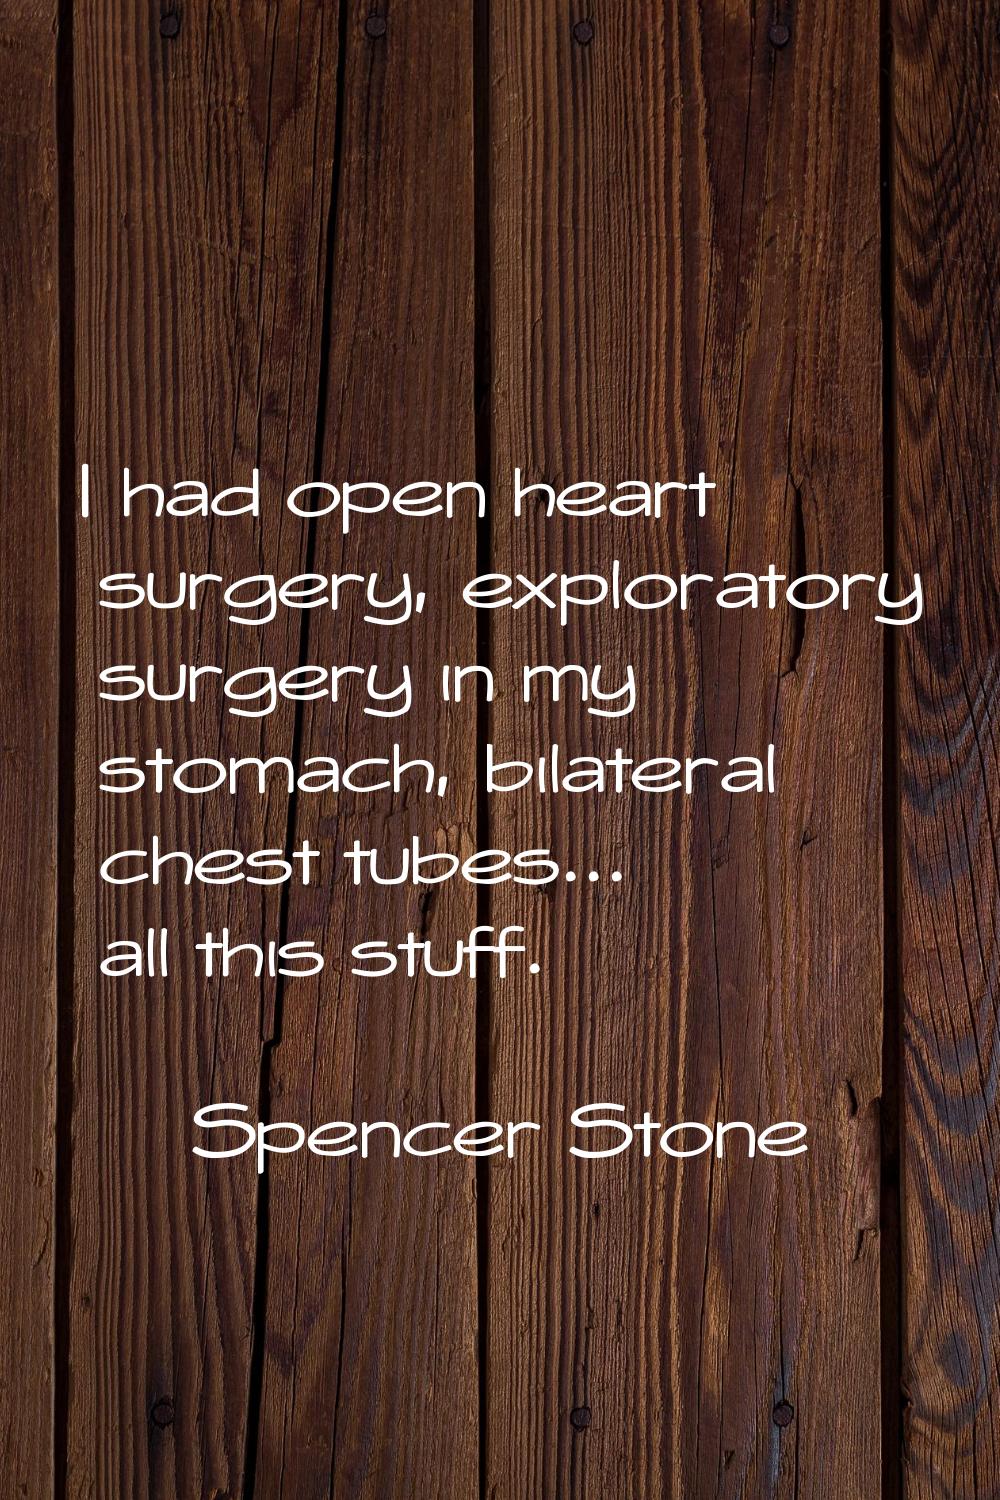 I had open heart surgery, exploratory surgery in my stomach, bilateral chest tubes... all this stuf